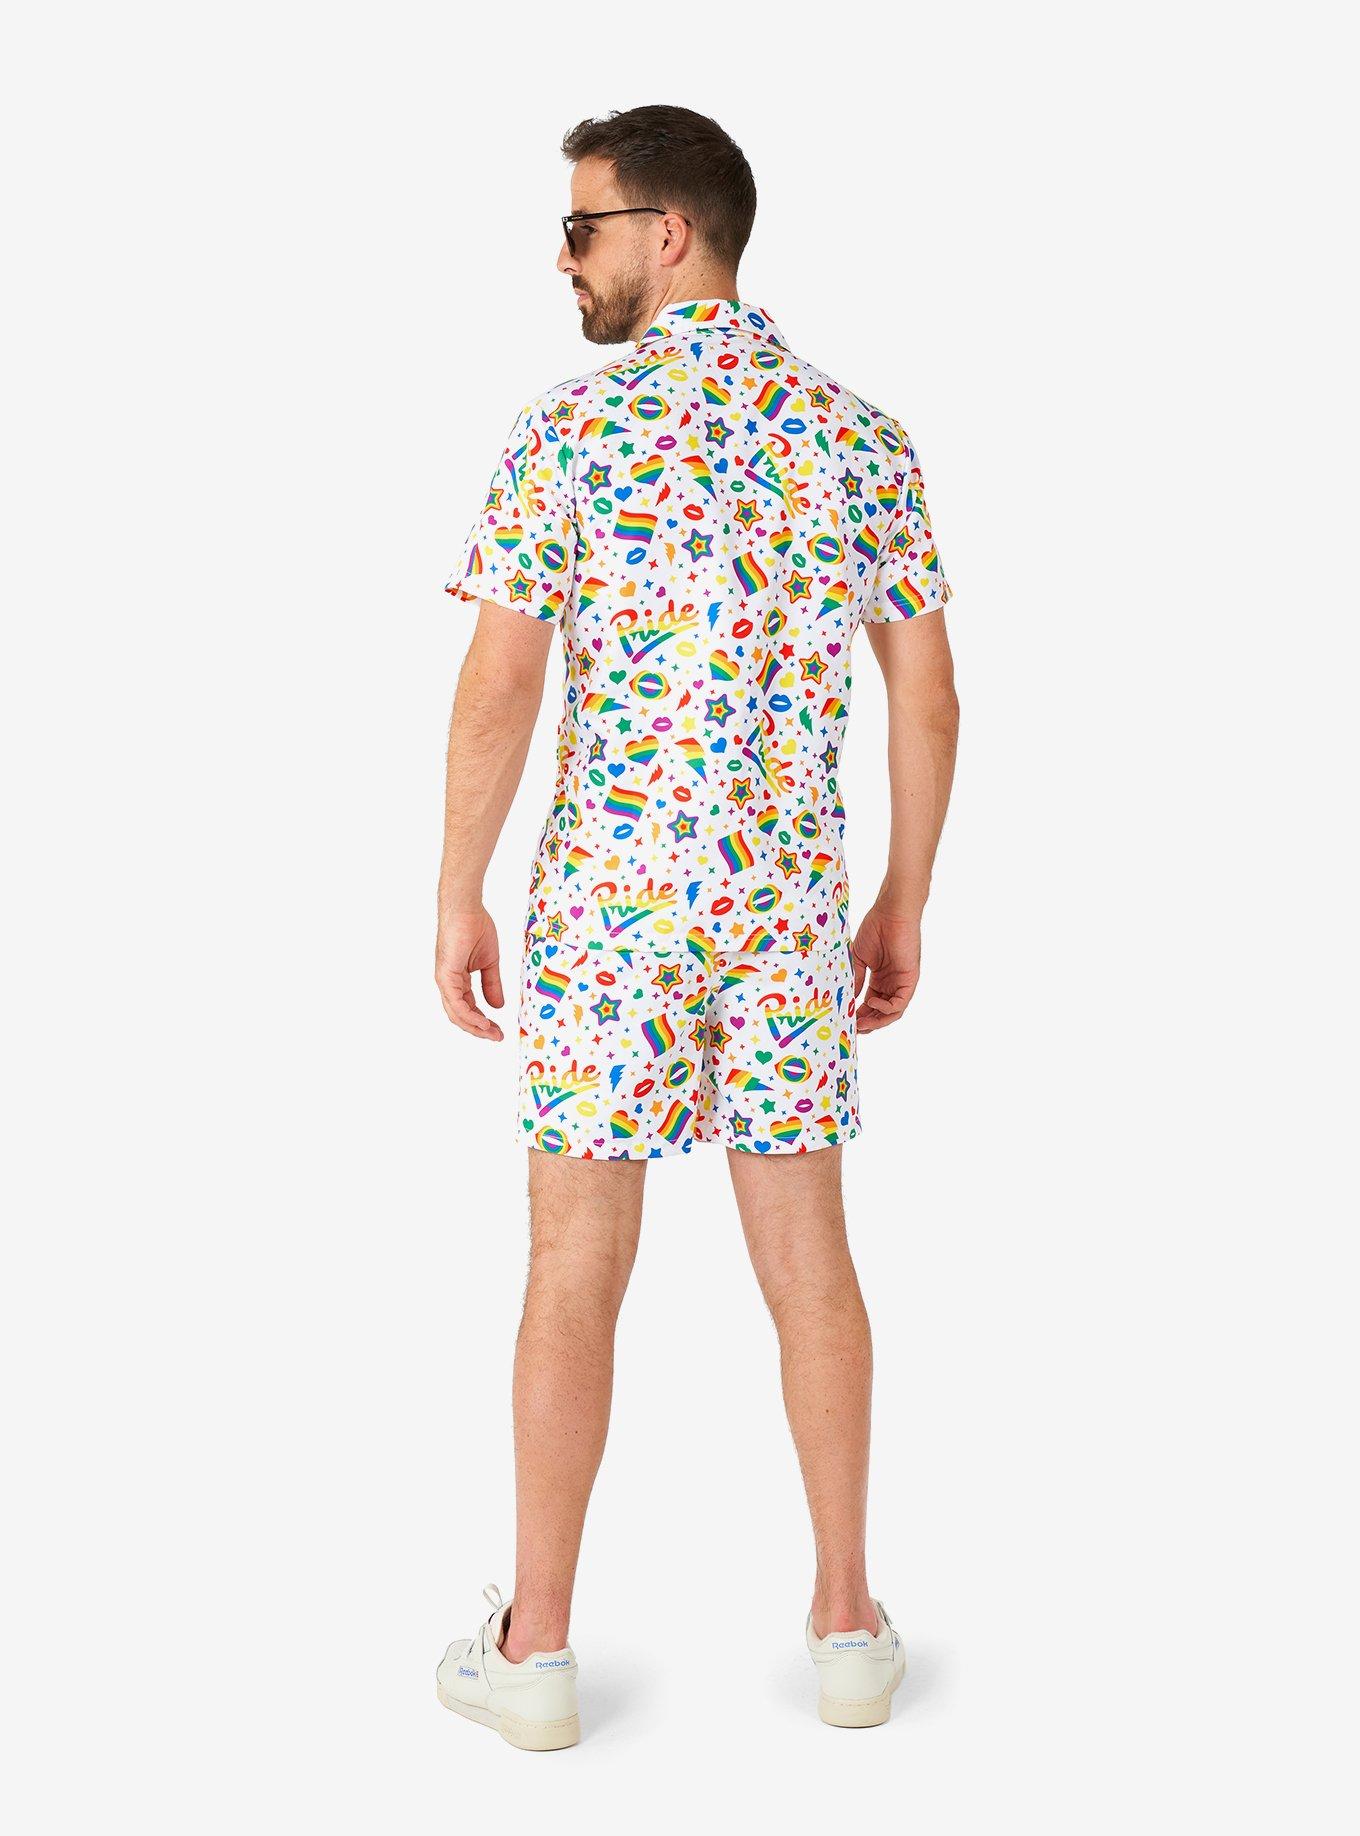 Pride Icons White Button-Up Shirt and Short, MULTI, alternate